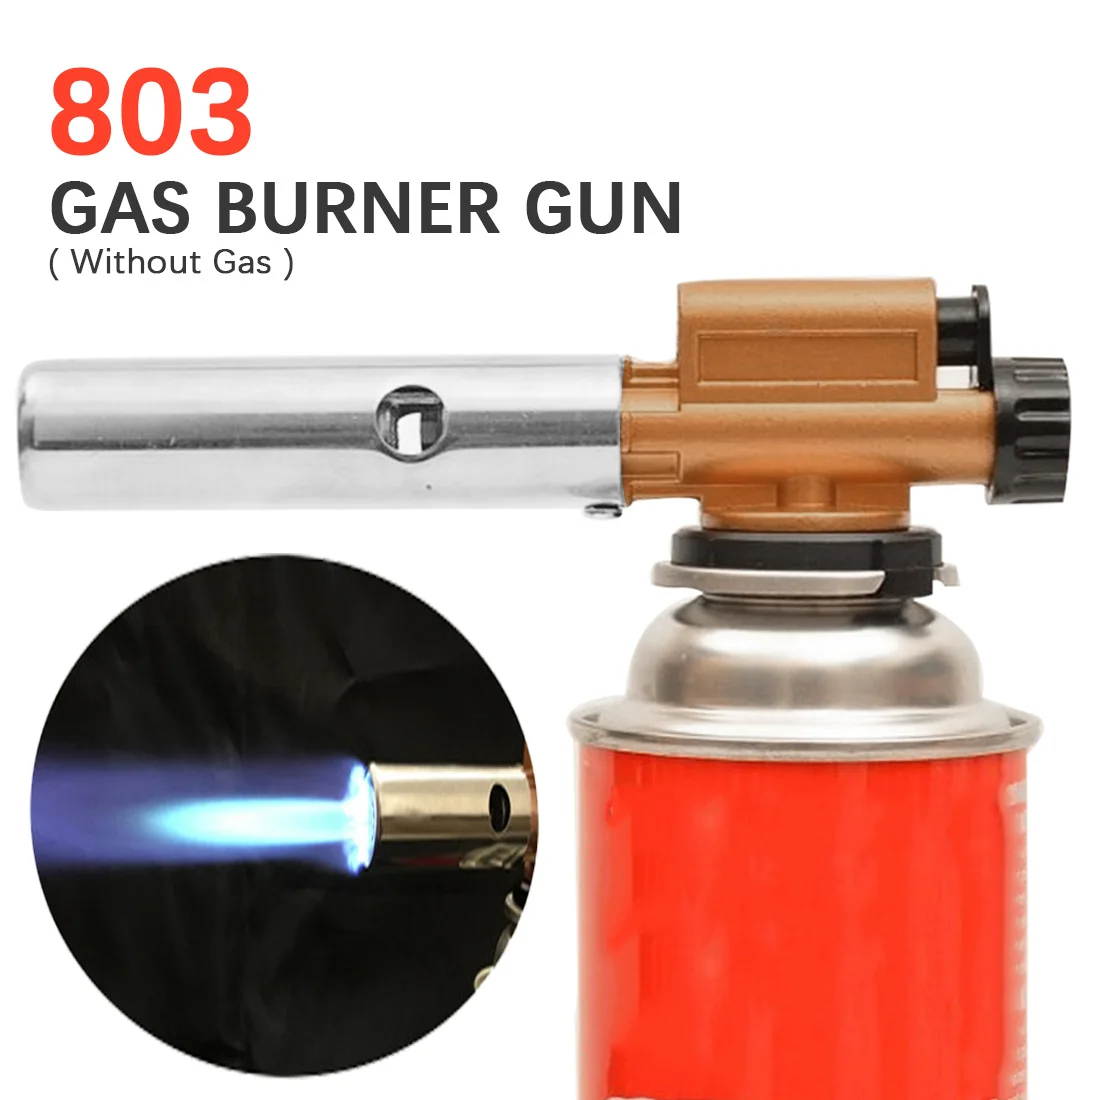 

Gas Burner Electronic Ignition Copper Flame Gas Burners Gun Maker Torch Lighter For BBQ Outdoor Camping Picnic Welding Equipment